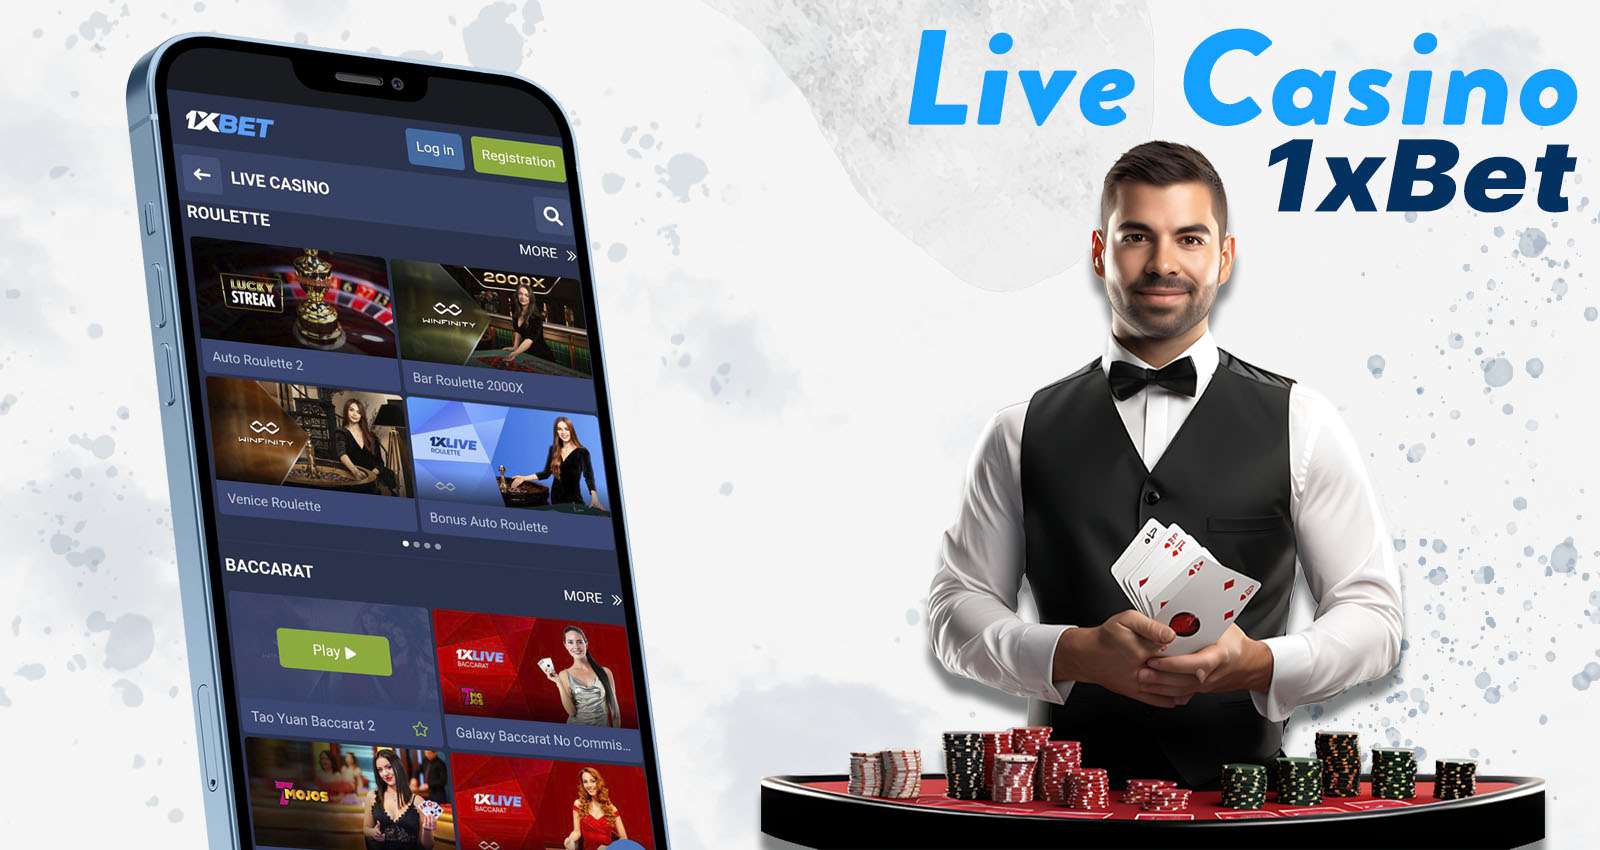 A wide range of 1xBet live dealer games, including popular casino classics such as roulette, blackjack, baccarat and poker